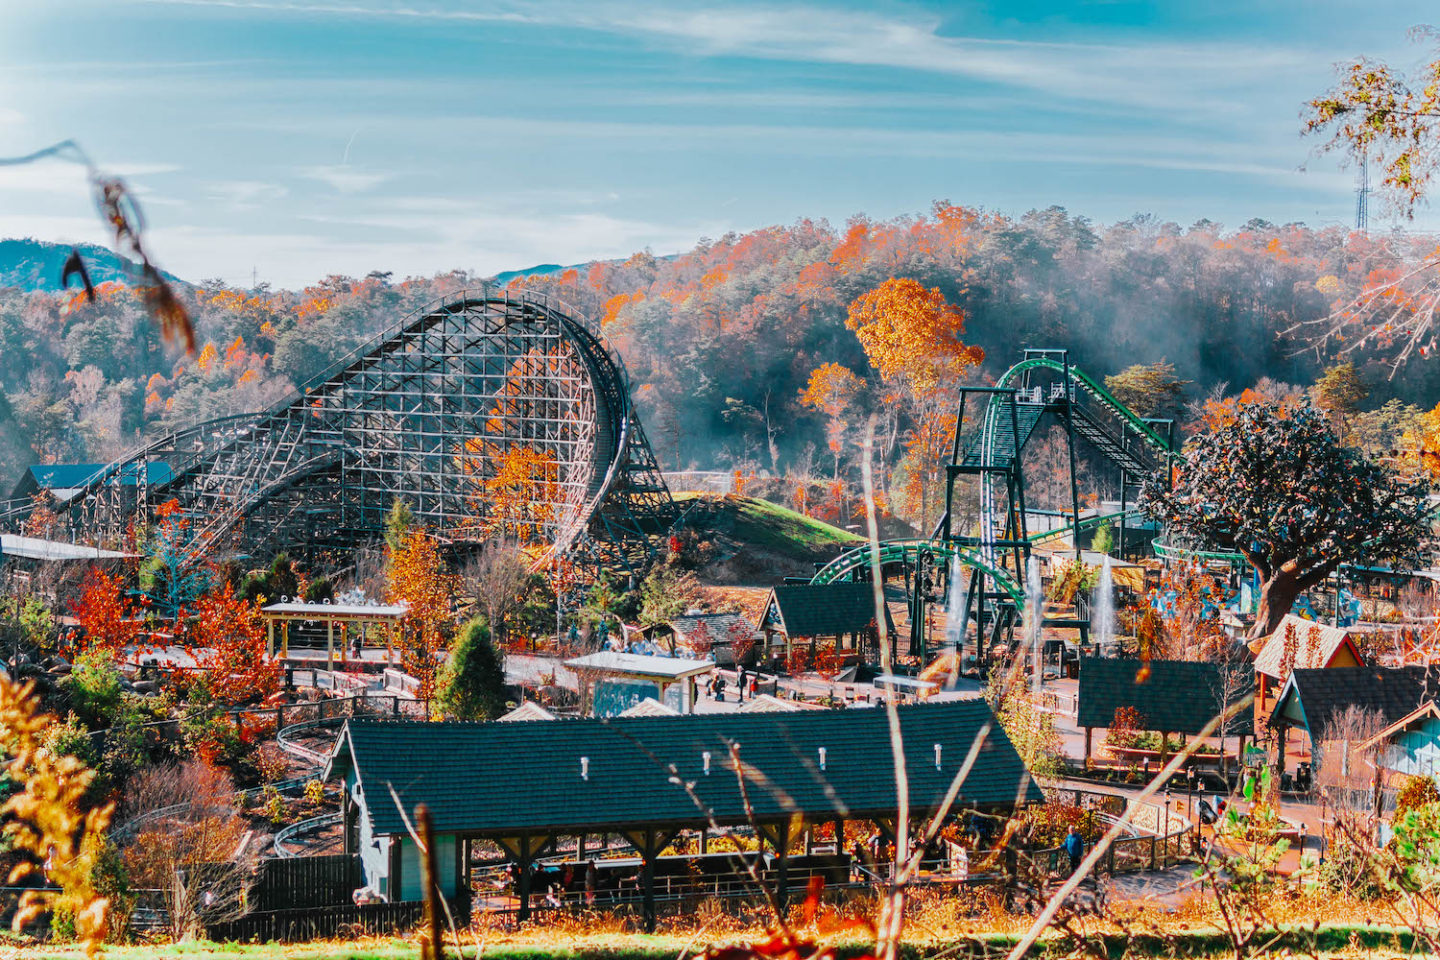 The Best Dollywood Roller Coasters, Food, & More [Ultimate Guide